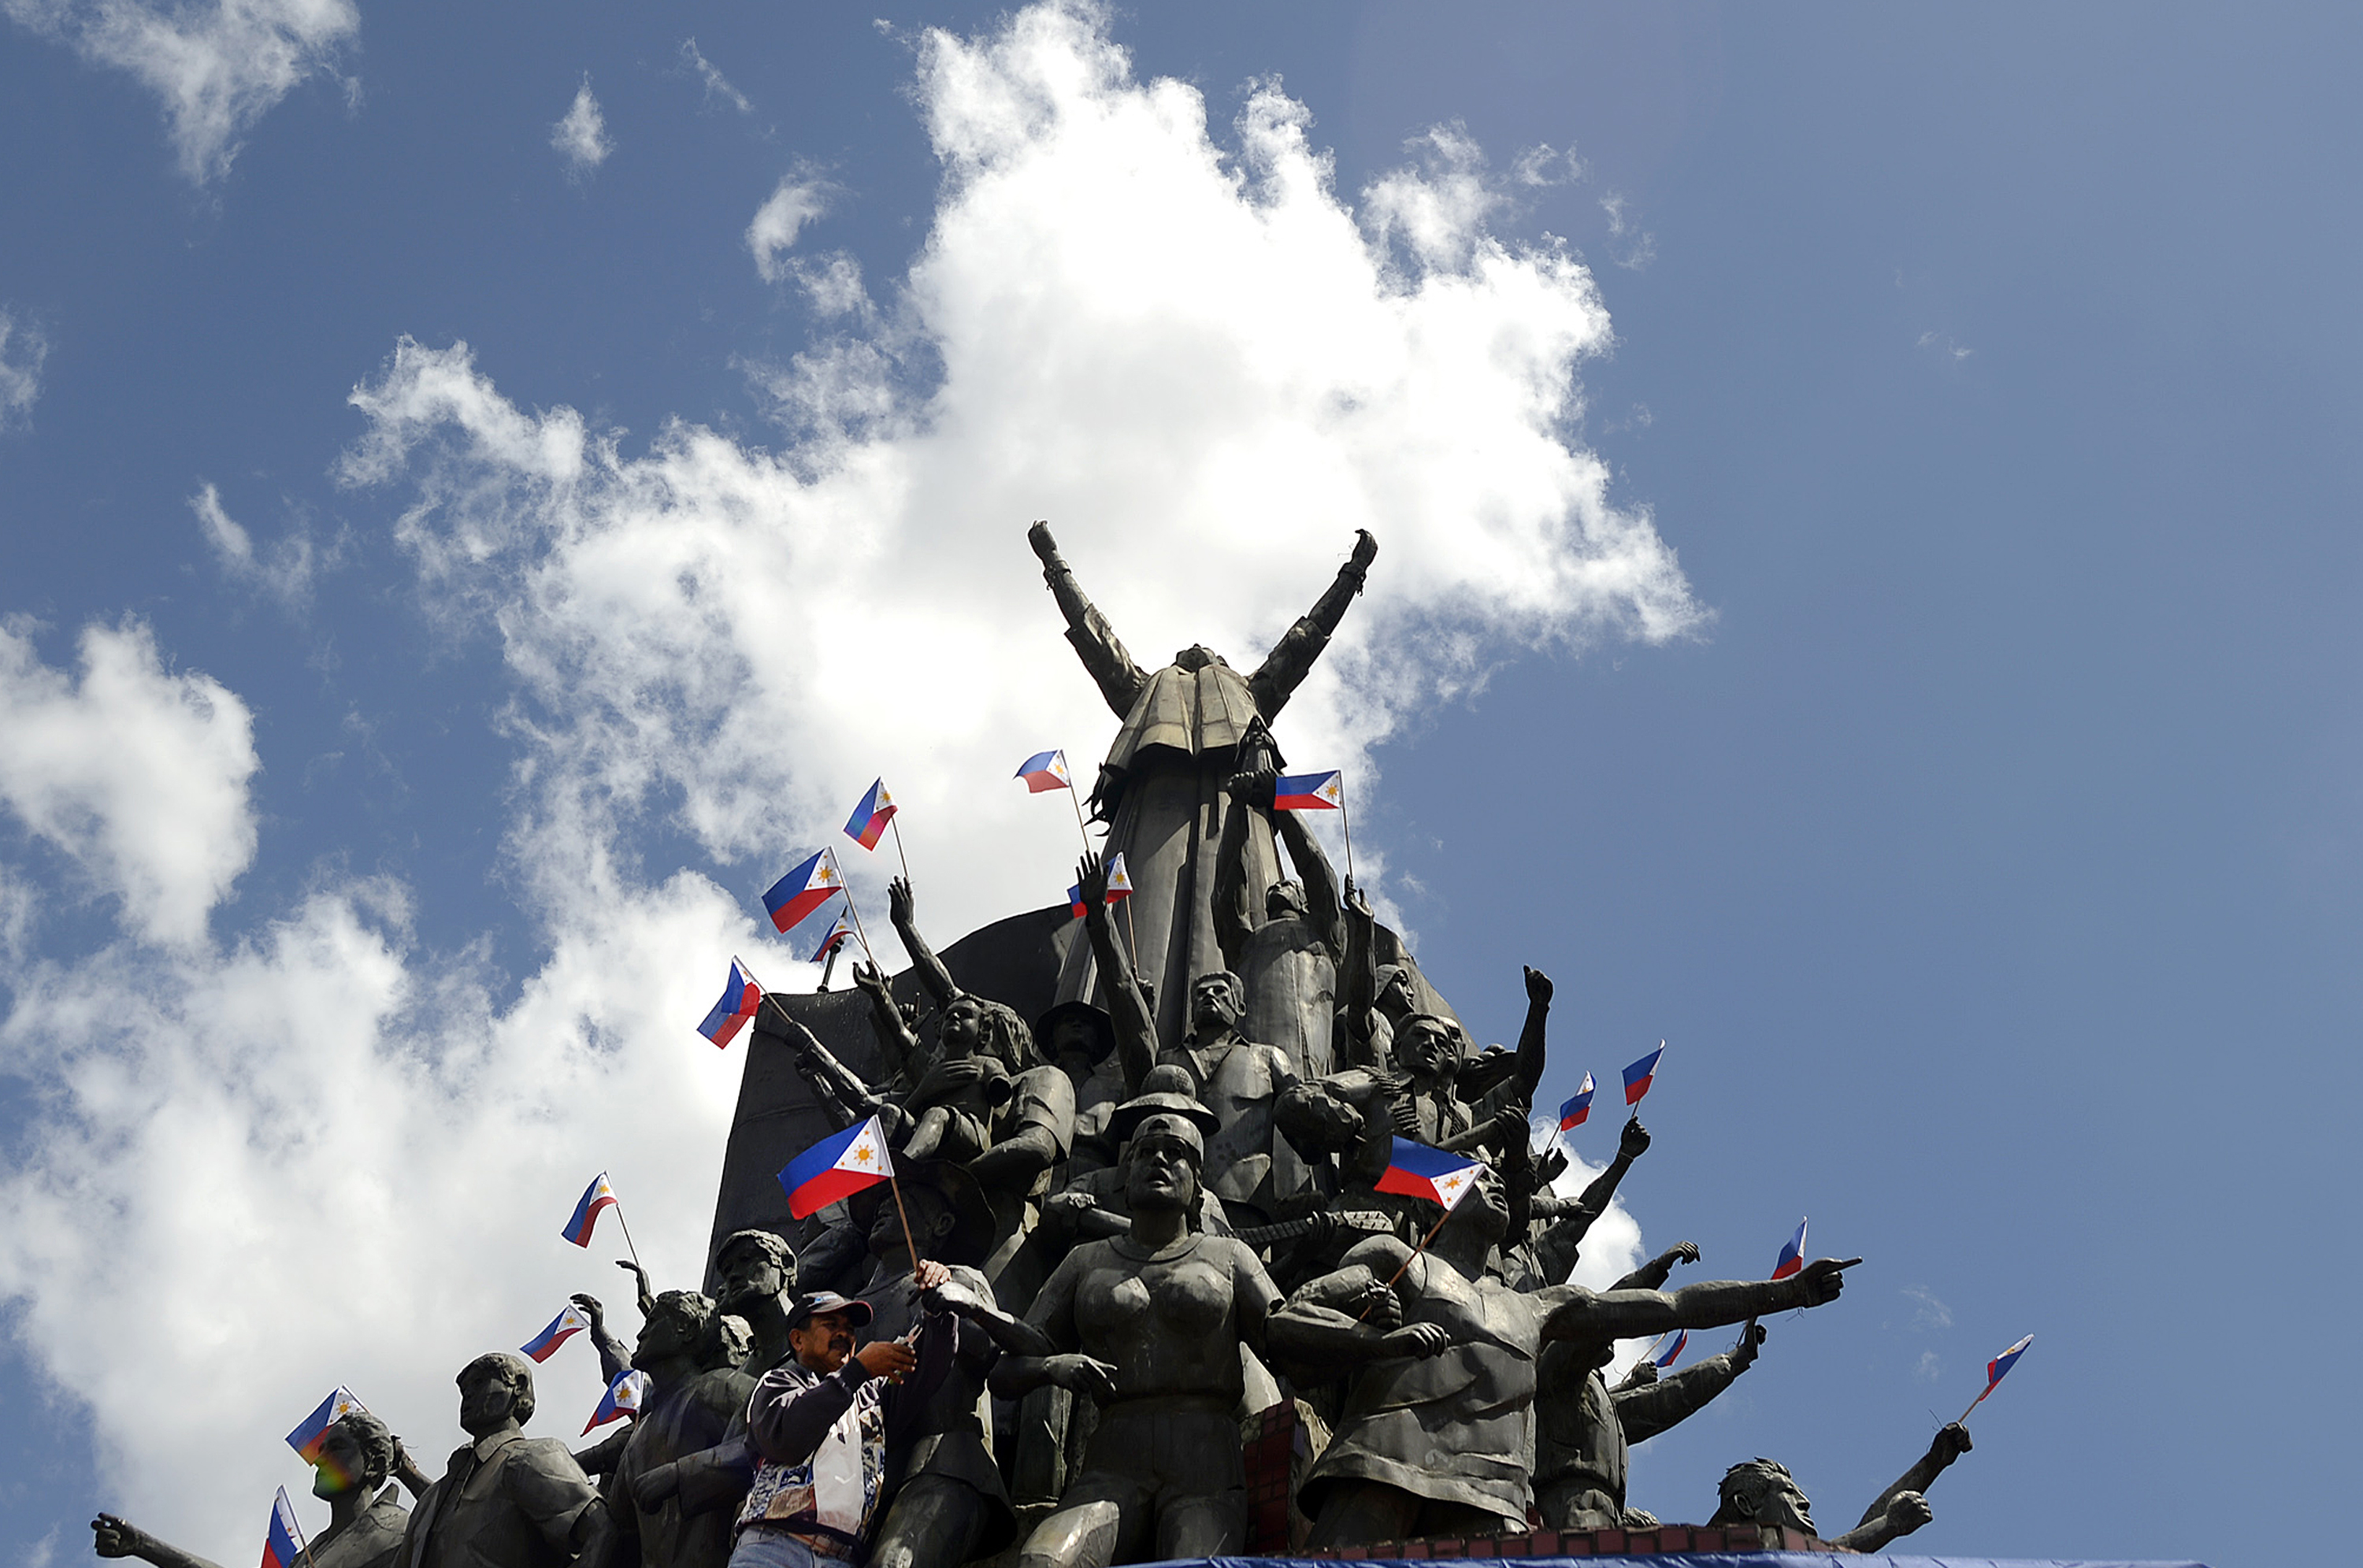 Philippine flags adorn the People Power Monument in Manila for the 30th anniversary in 2016 of the revolution that ended the Ferdinand Marcos dictatorship. With Marcos Jr. now president, some worry the past is at risk of being forgotten. (Noel Celis—AFP/Getty Images)